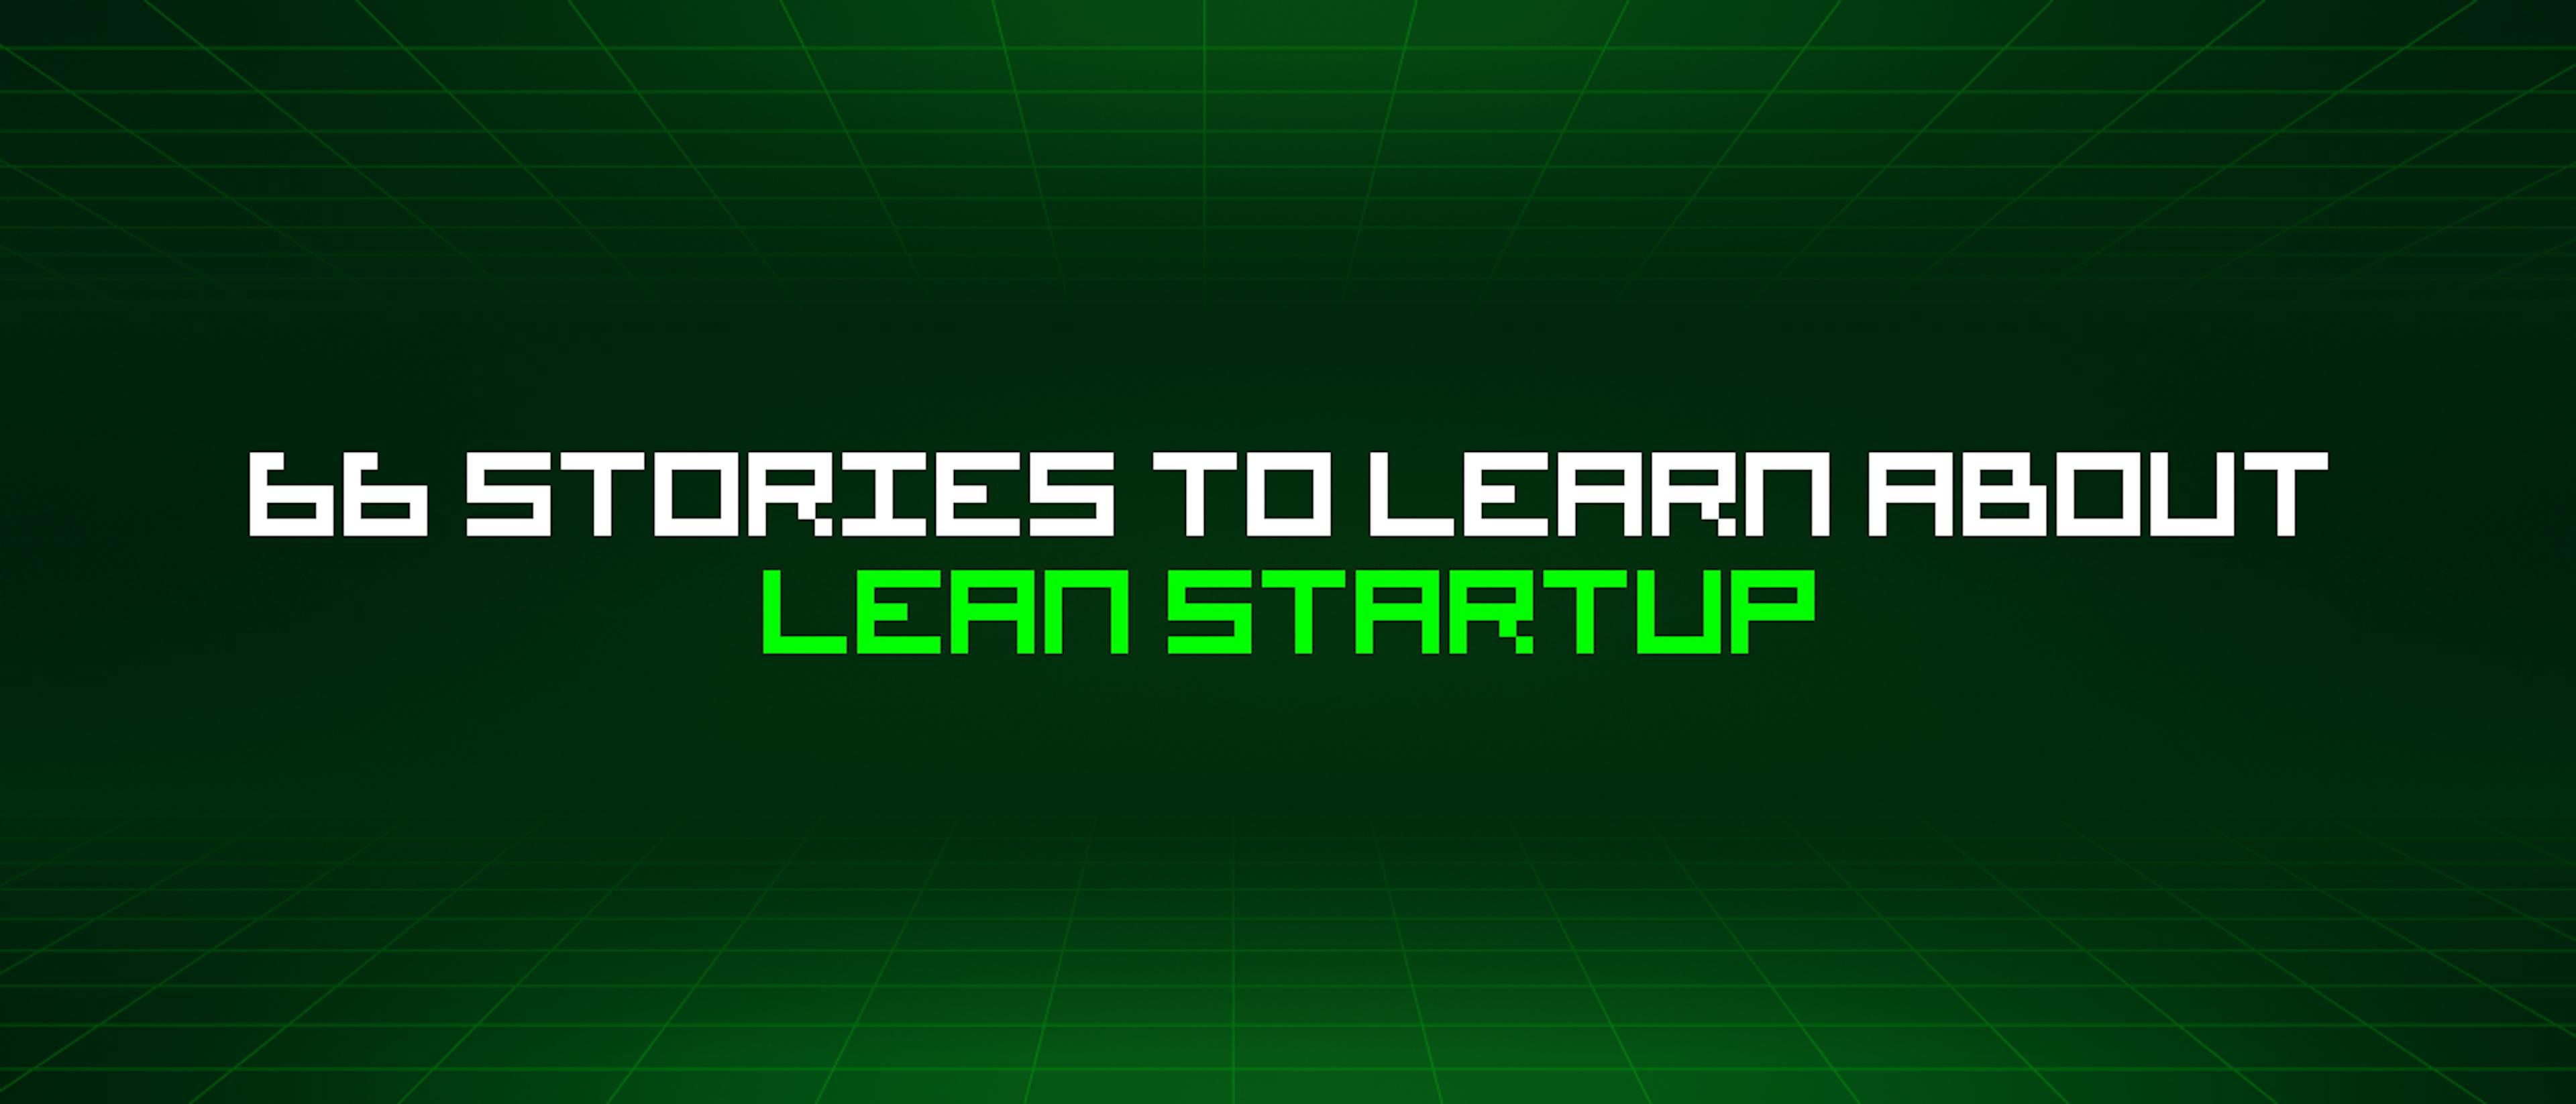 featured image - 66 Stories To Learn About Lean Startup